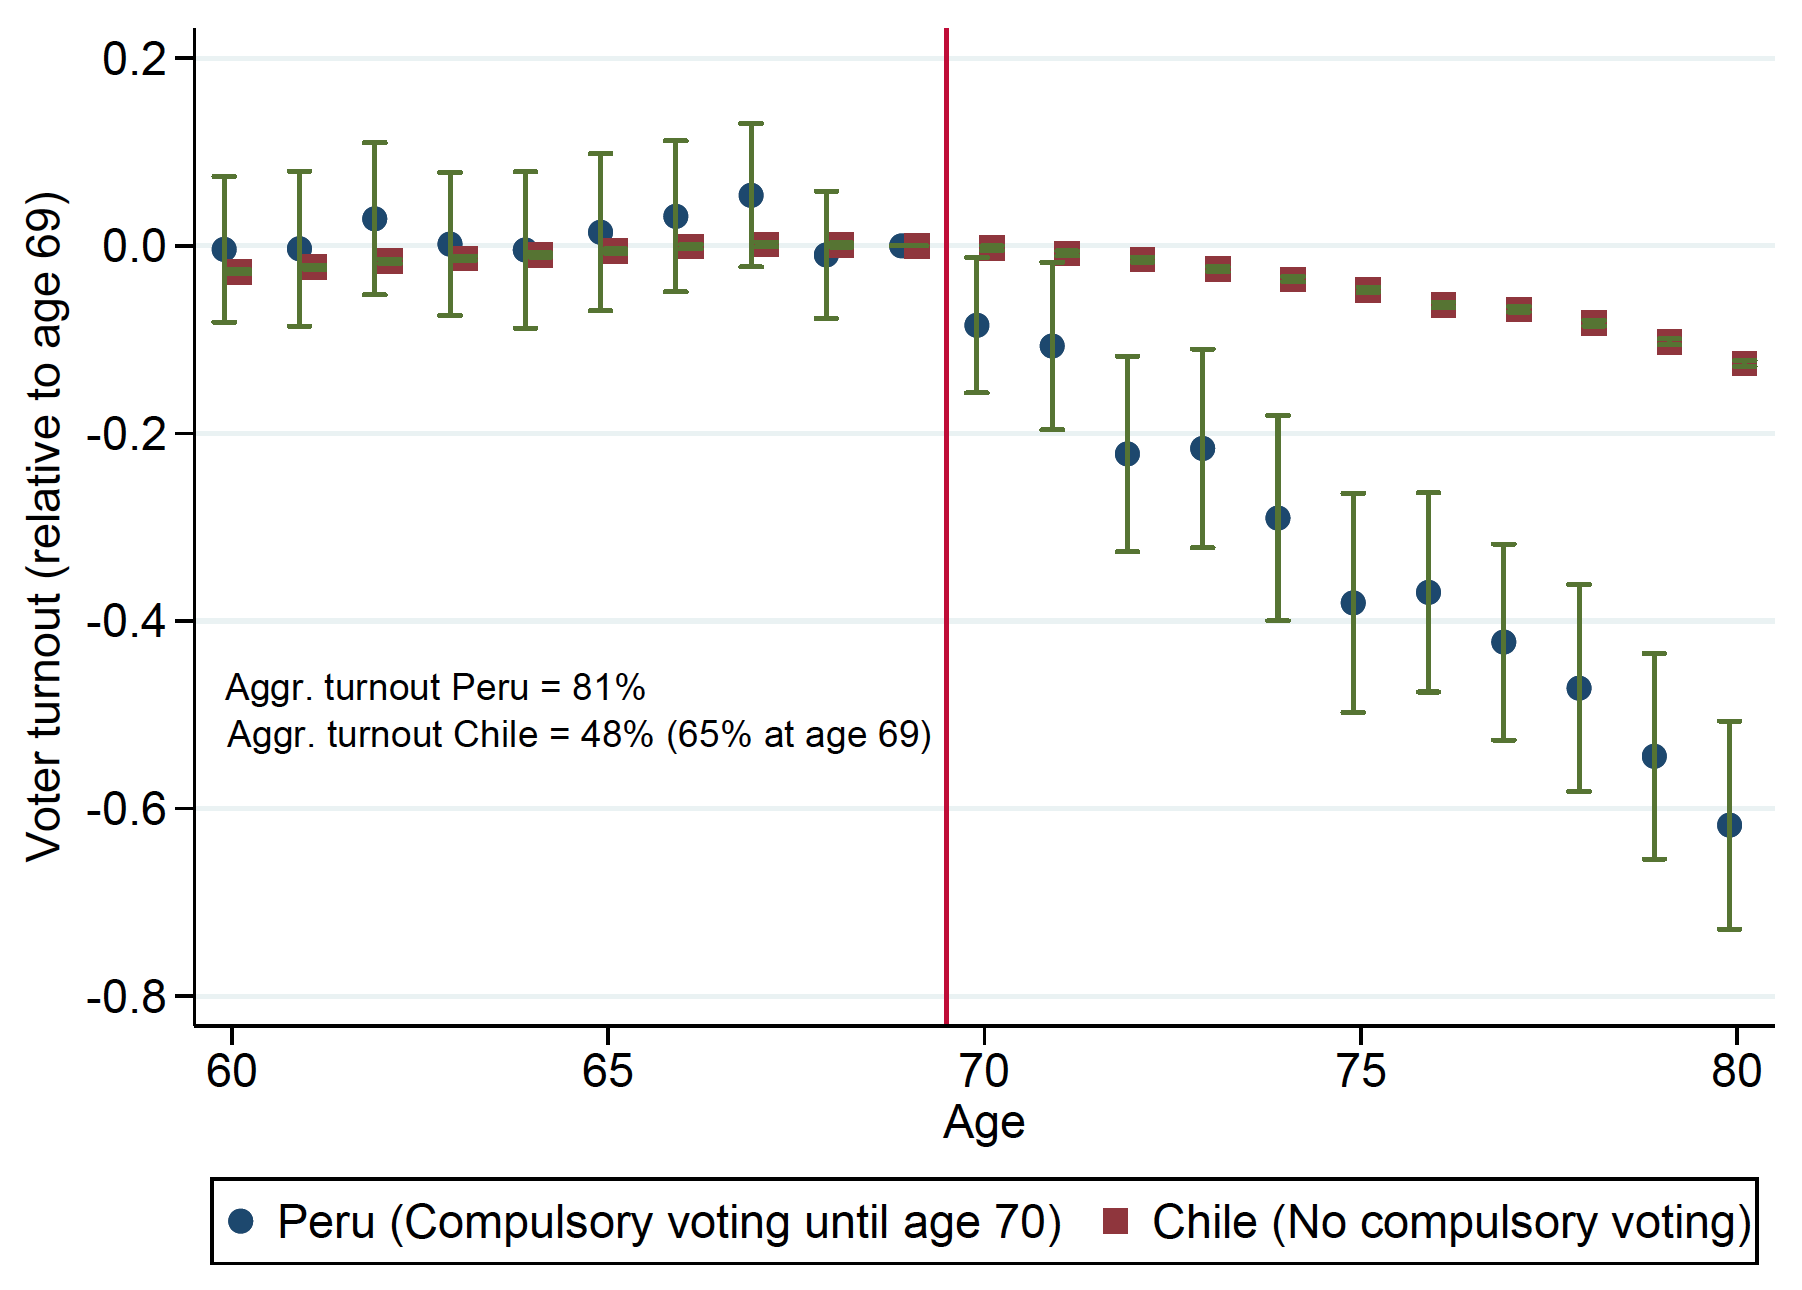 Senior exemption from compulsory voting and voter turnout